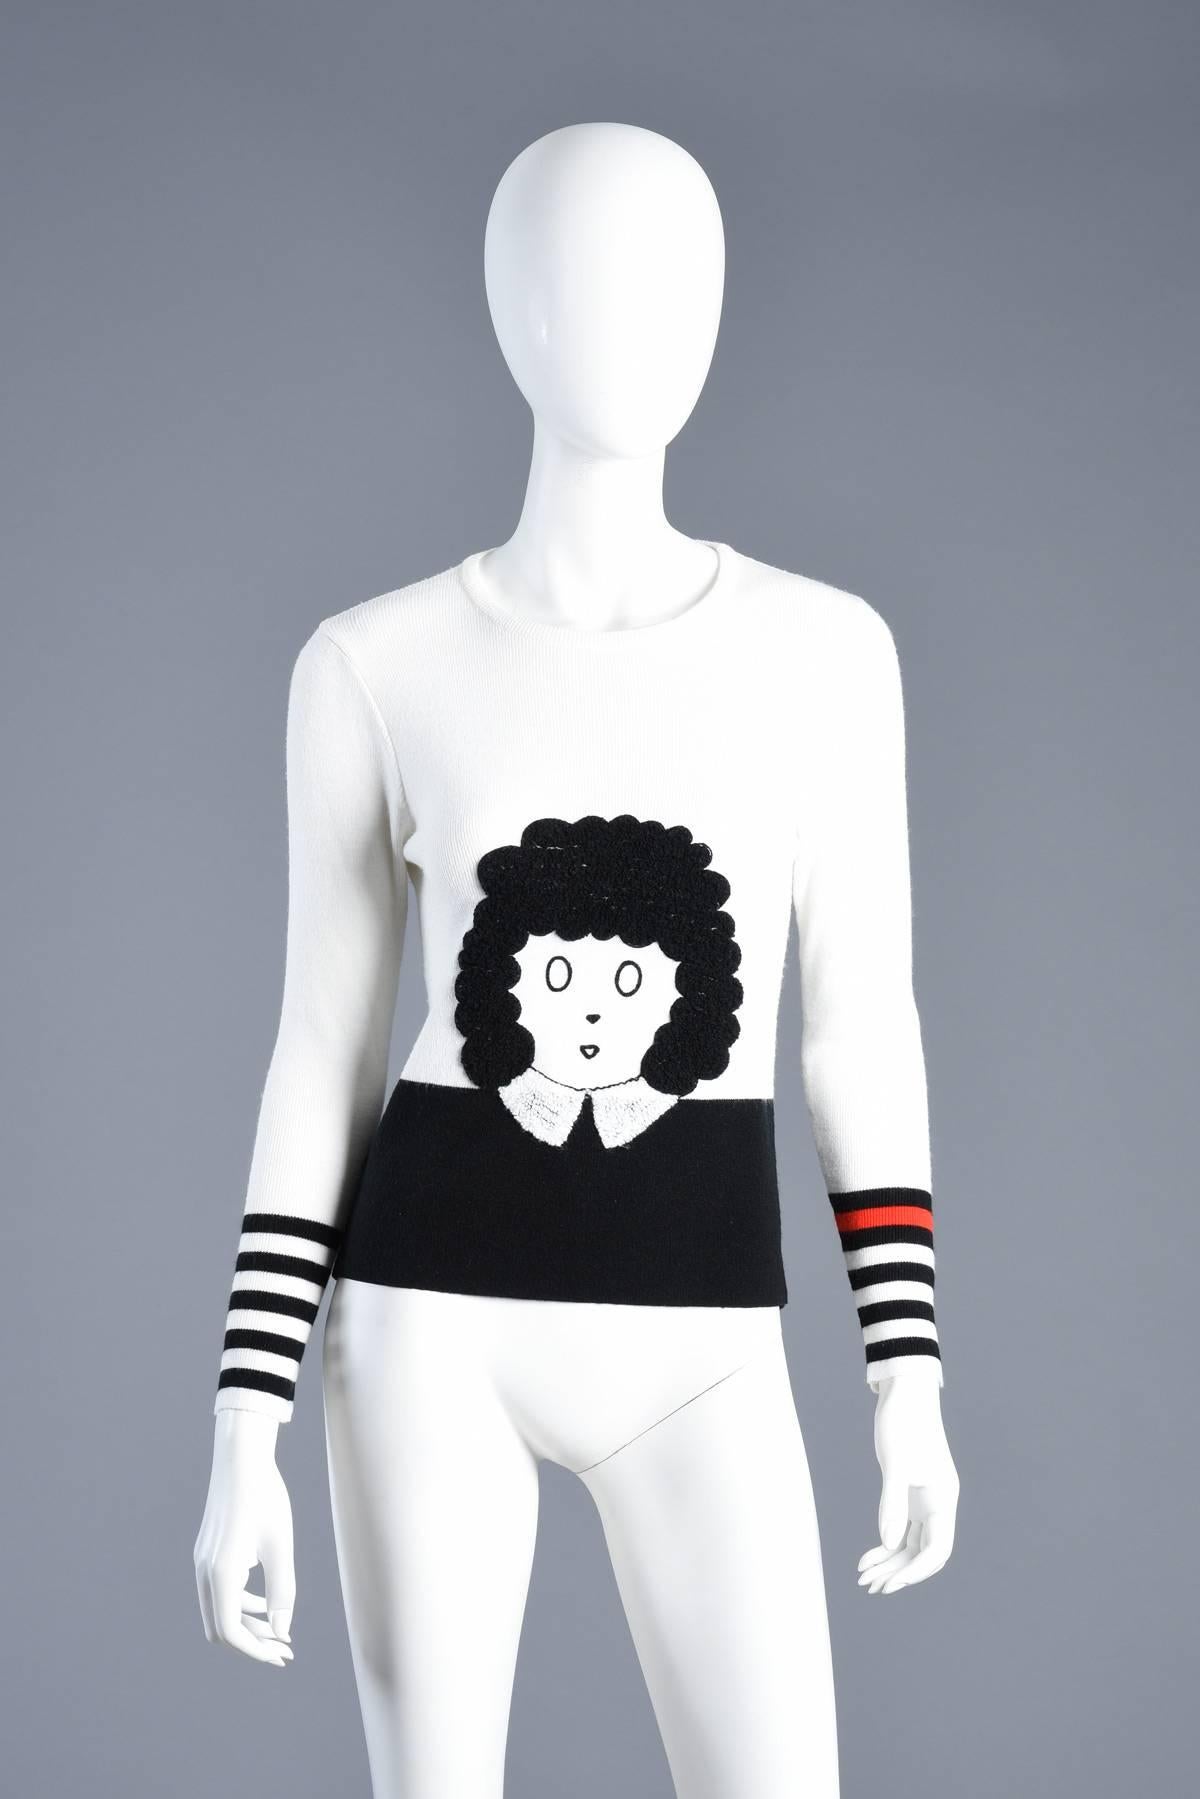 This amazingness doesn’t even really need a description. It speaks for itself. Amazing vintage 1970s Little Orphan Annie novelty sweater. Lightweight ribbed knit top with graphic black bottom + striped sleeves. Appliquéd Little Orphan Annie with 3D